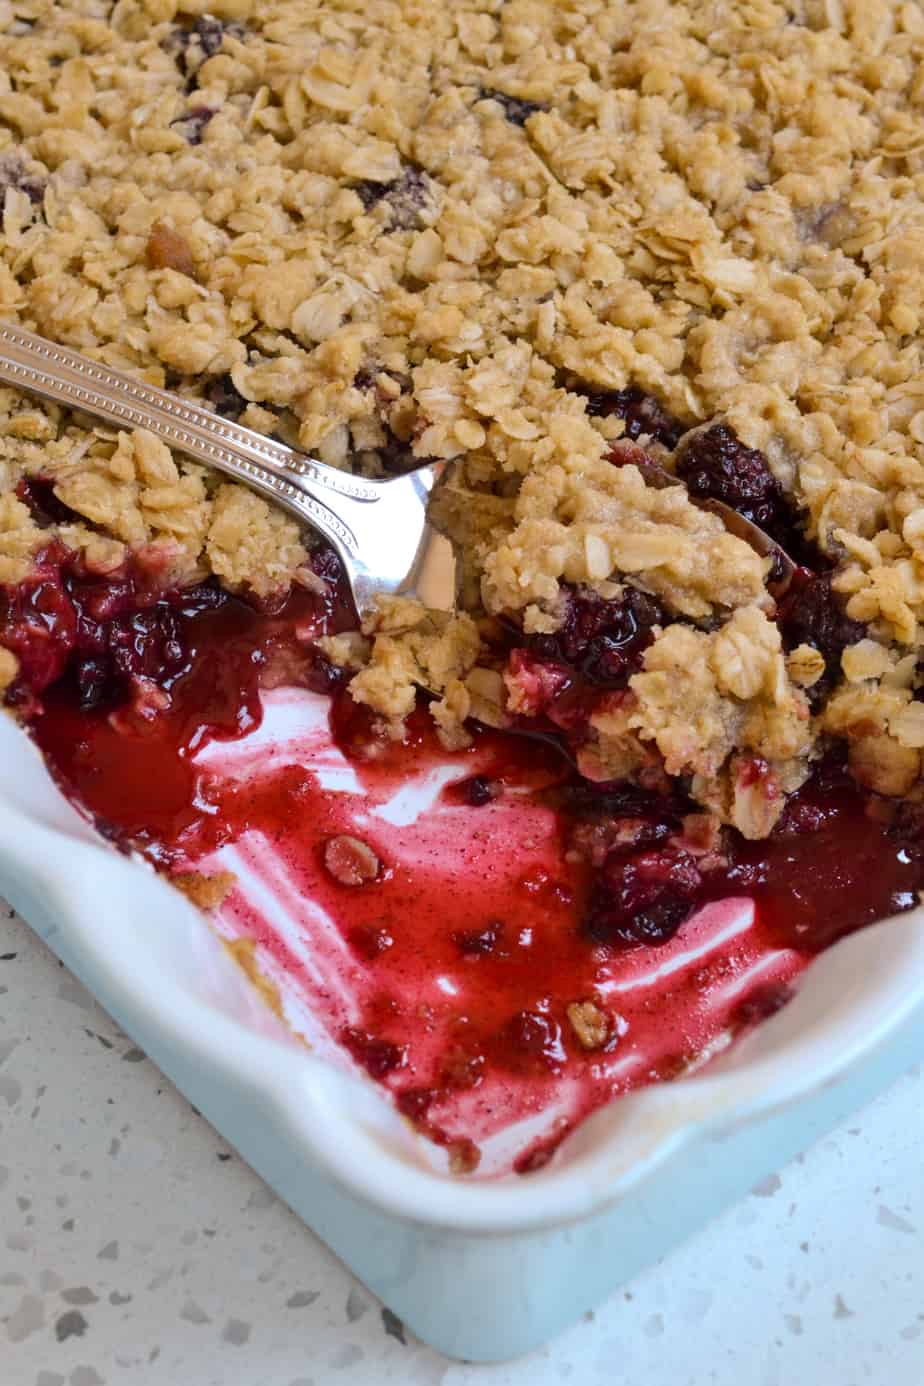 A delicious blackberry crisp with a crunchy oat topping!